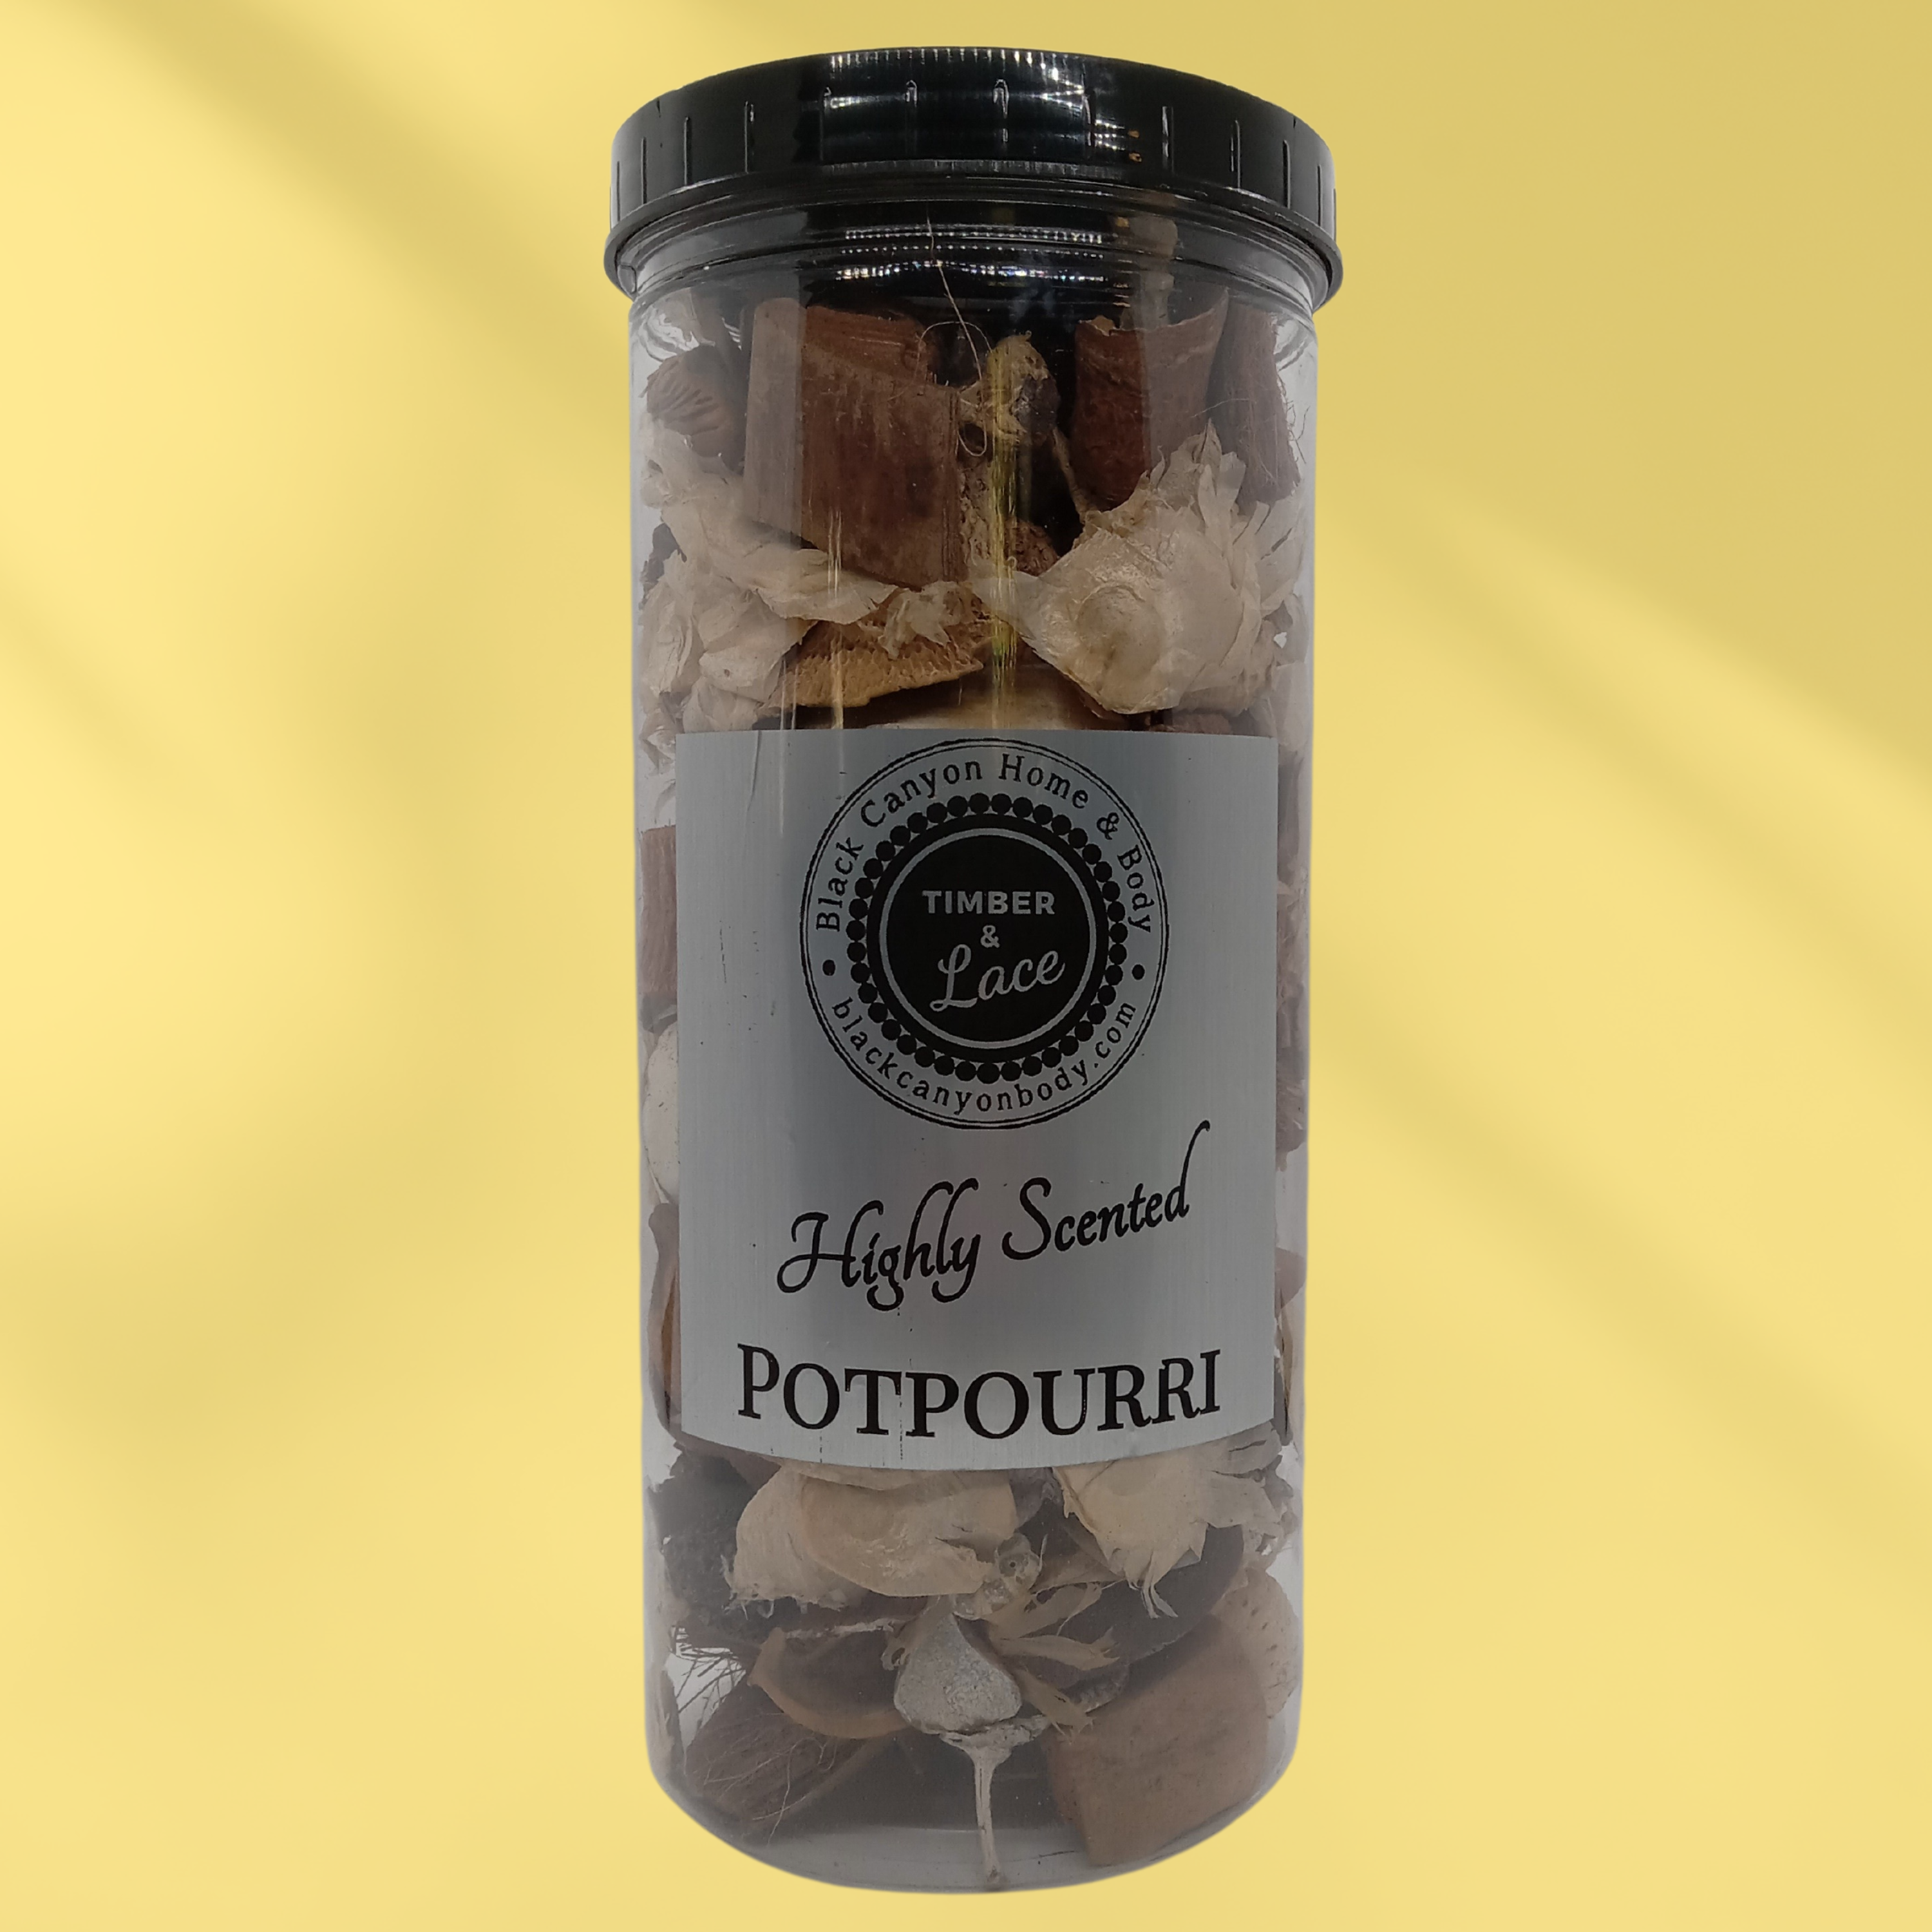 Timber & Lace Sugary Sweet Patchouli Scented Potpourri